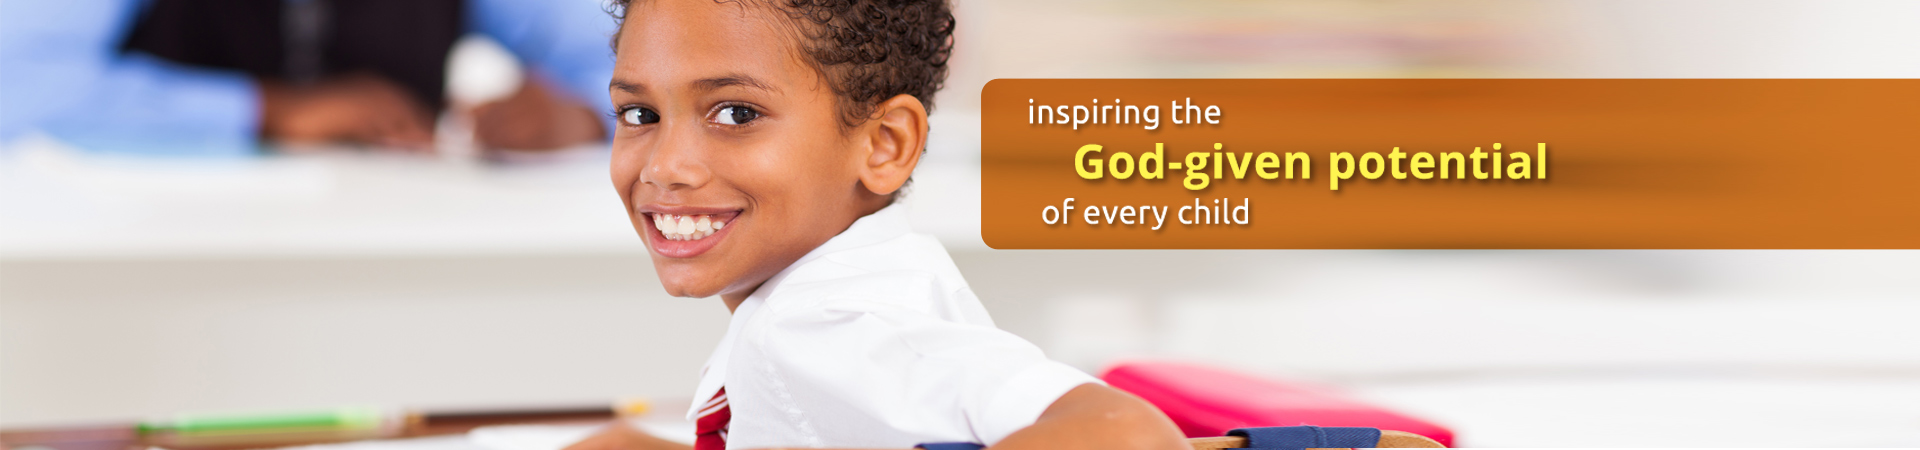 LASE inspires the God-given potential of every child